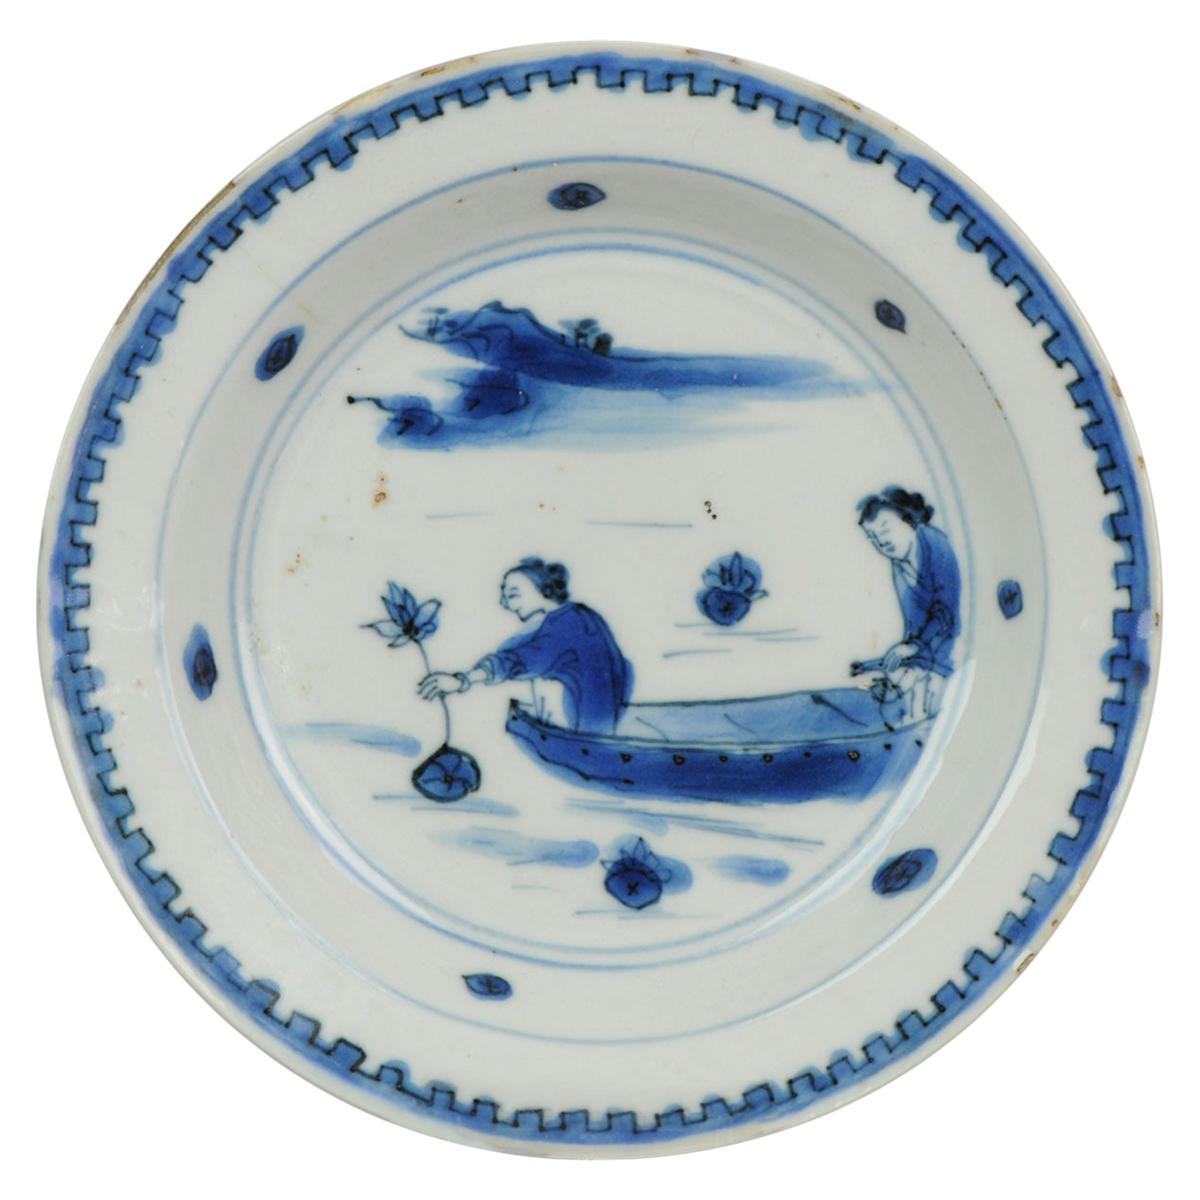 Chinese Porcelain Plate 17th Century Lotus Fishing Ming Dynasty Tianqi/Chongzhen For Sale